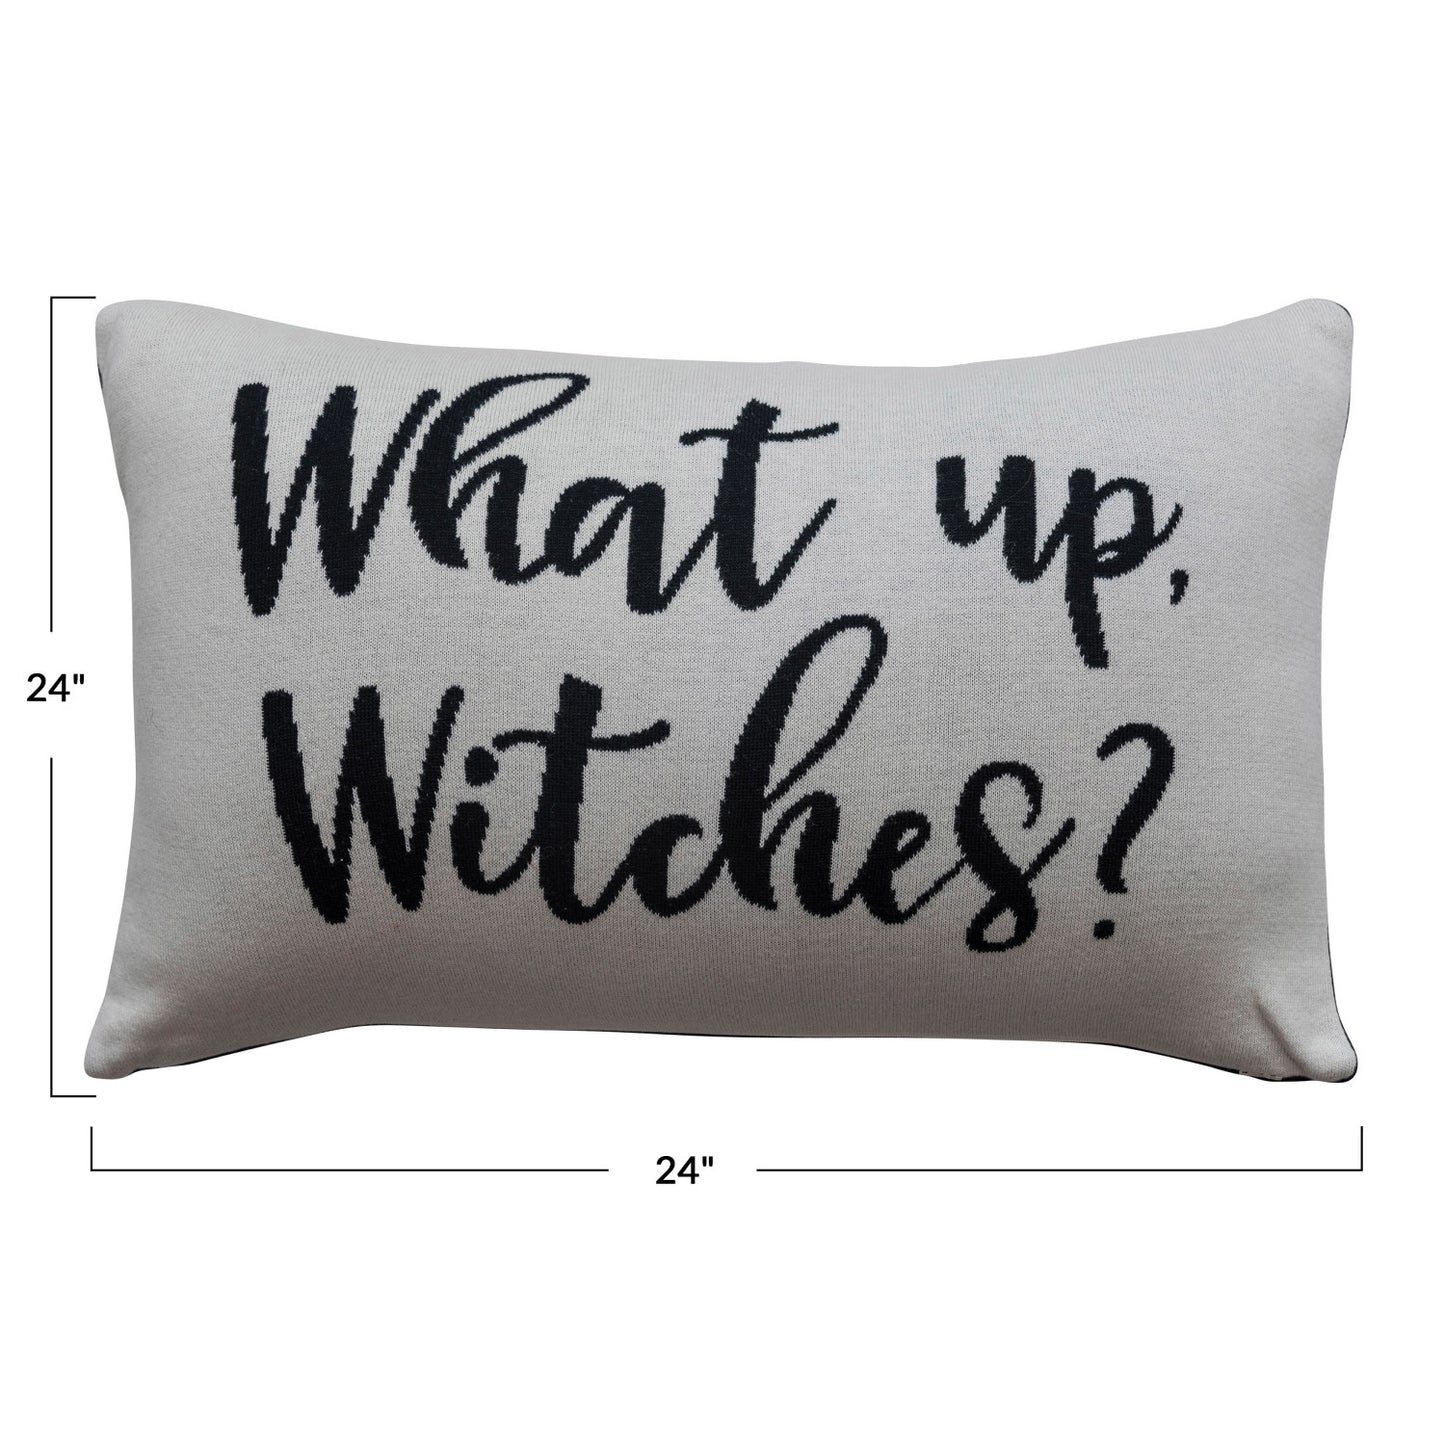 "What up, Witches?" 24" x 16" Two-Sided Cotton Knit Pillow